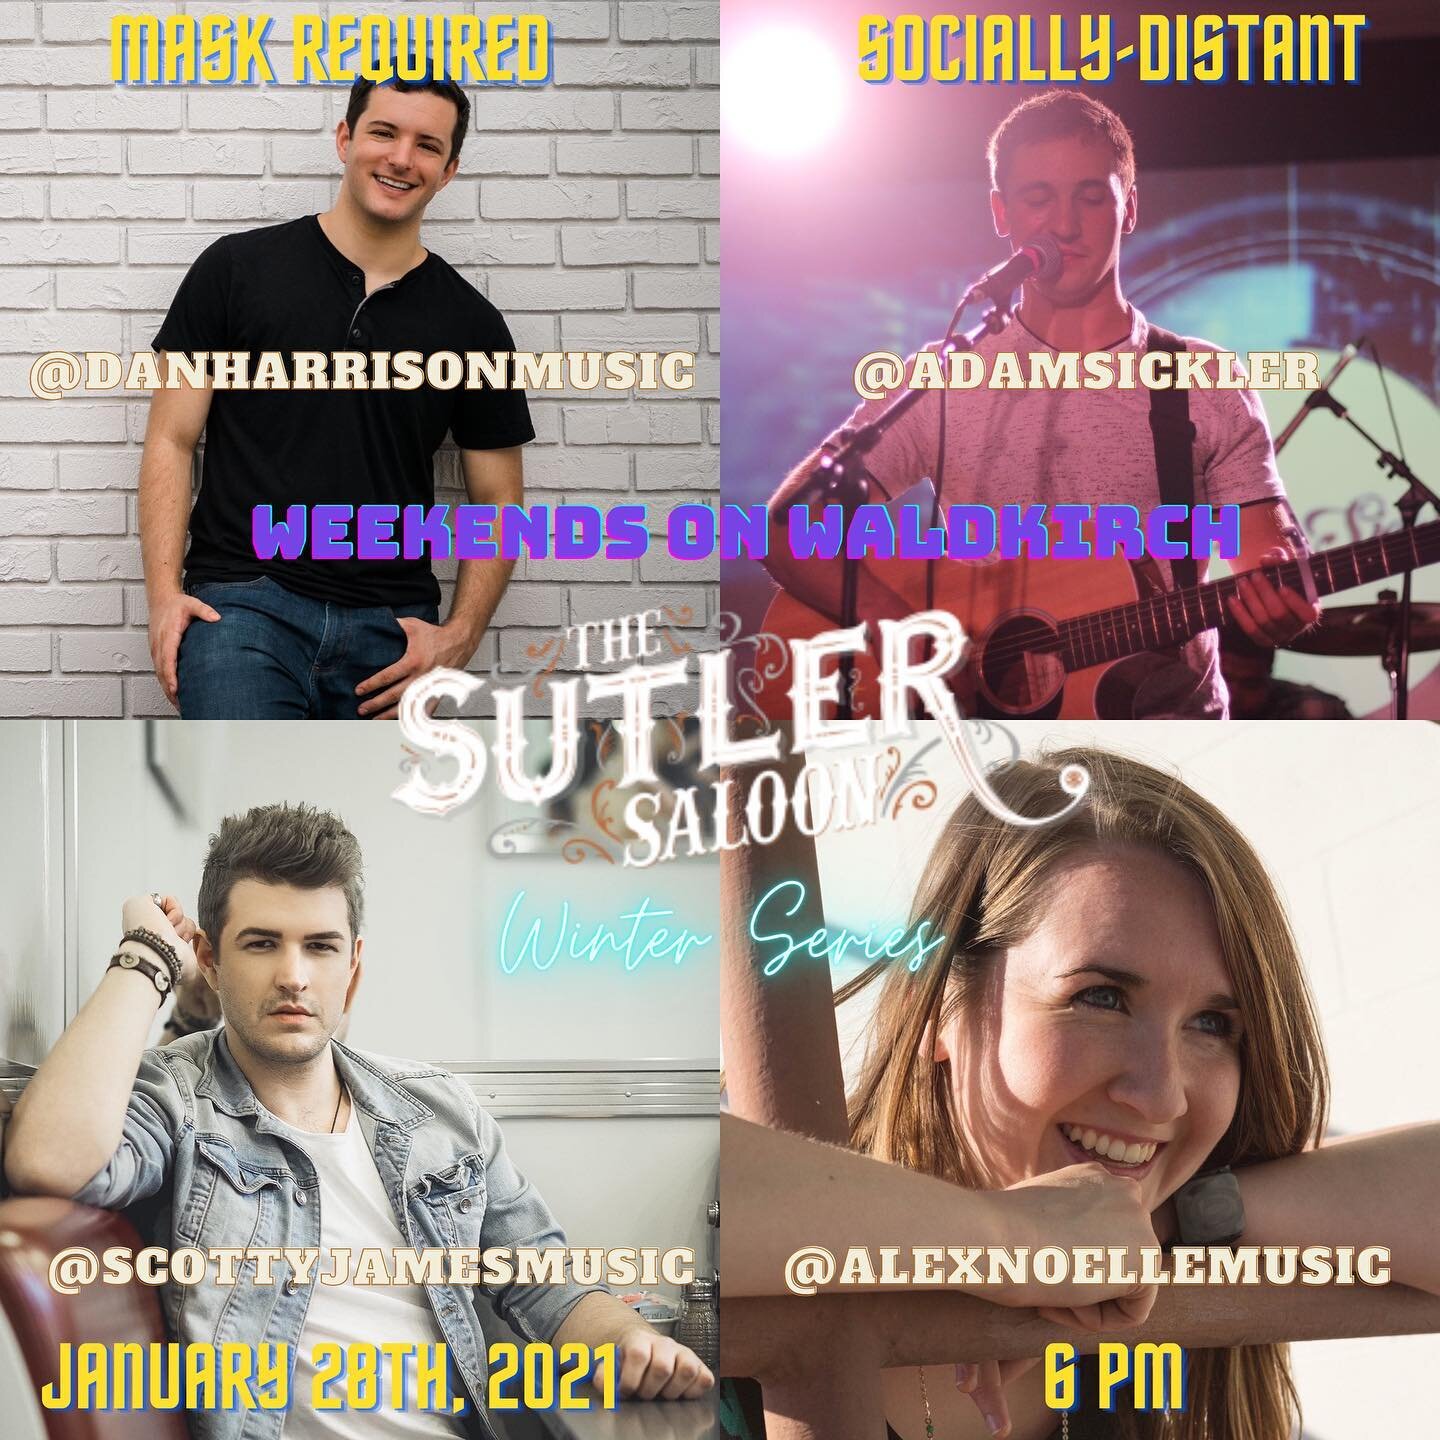 If you&rsquo;re in Nashville tonight, come visit us @thesutler. All social distancing and mask rules apply. Come hear some original tunes at one of my favorite venues in town!